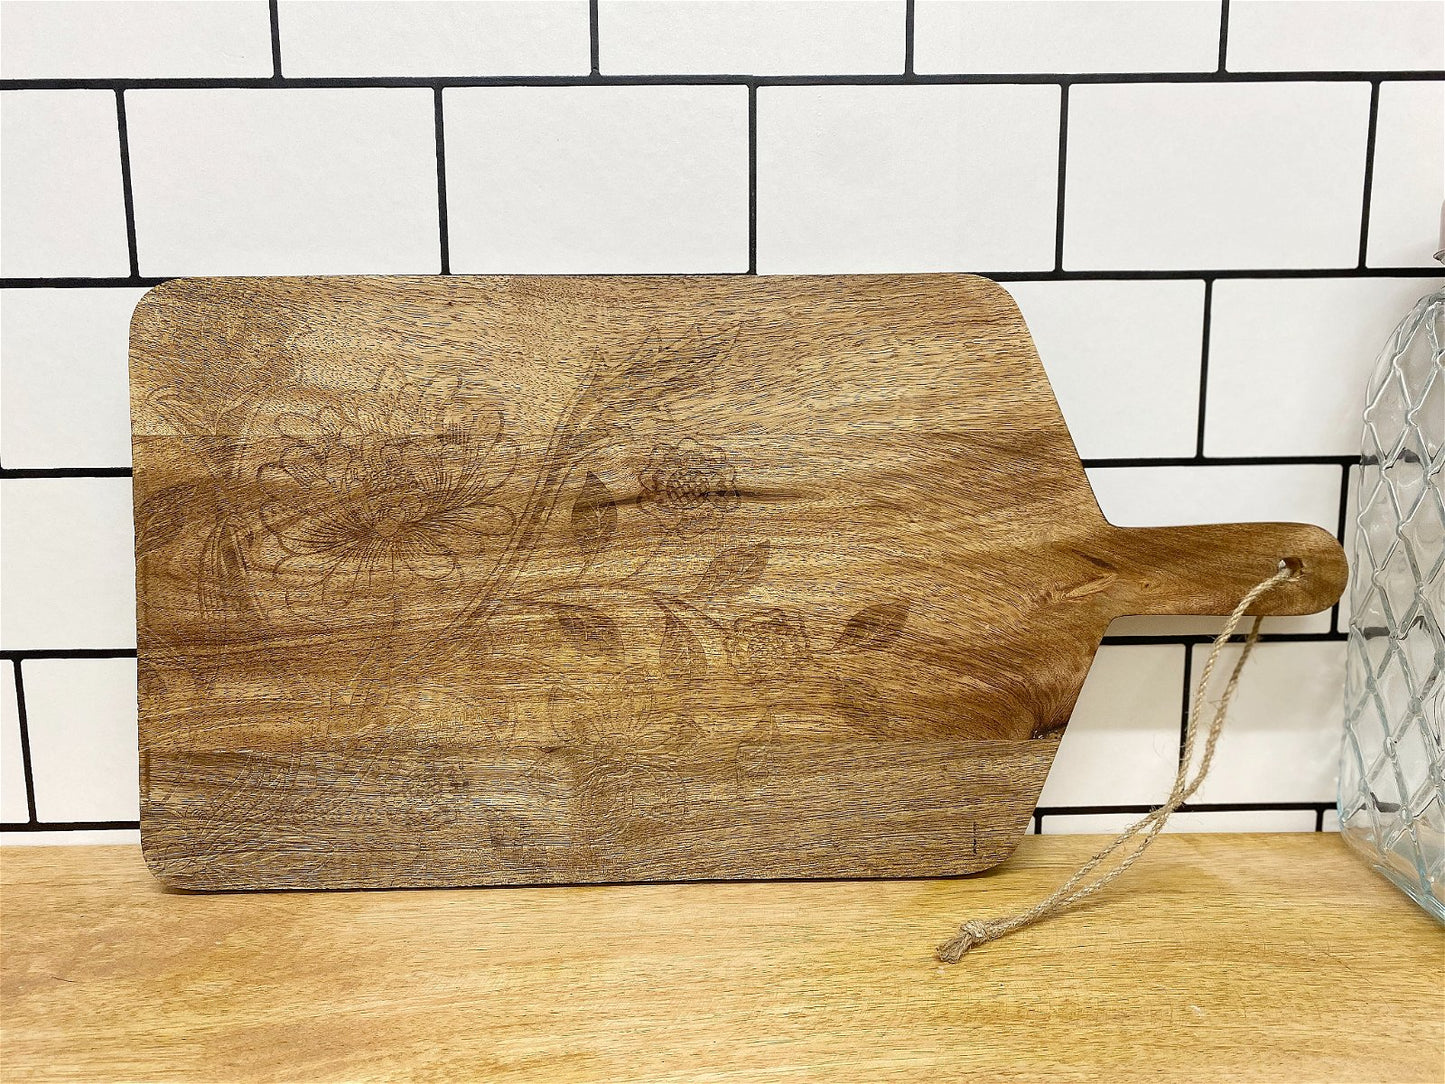 Etched Wood Chopping Board